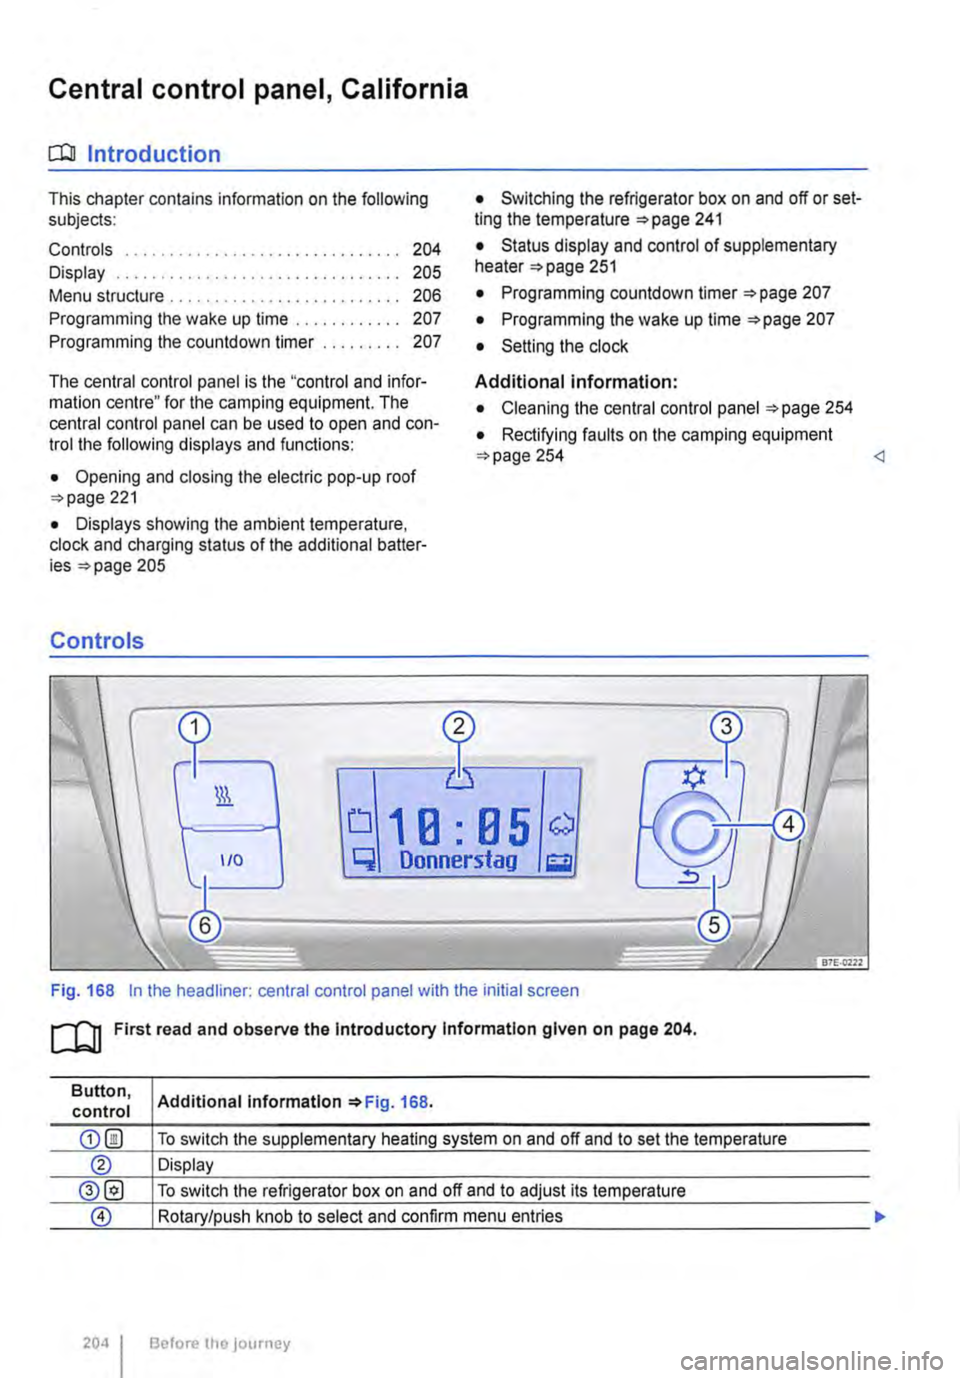 VOLKSWAGEN TRANSPORTER 2013  Owners Manual Central control panel, California 
COl Introduction 
This chapter contains information on the following subjects: 
Controls . . . . . . . . . . . . . . . . . . . . . . . . . . . . . . . 204 
Display .